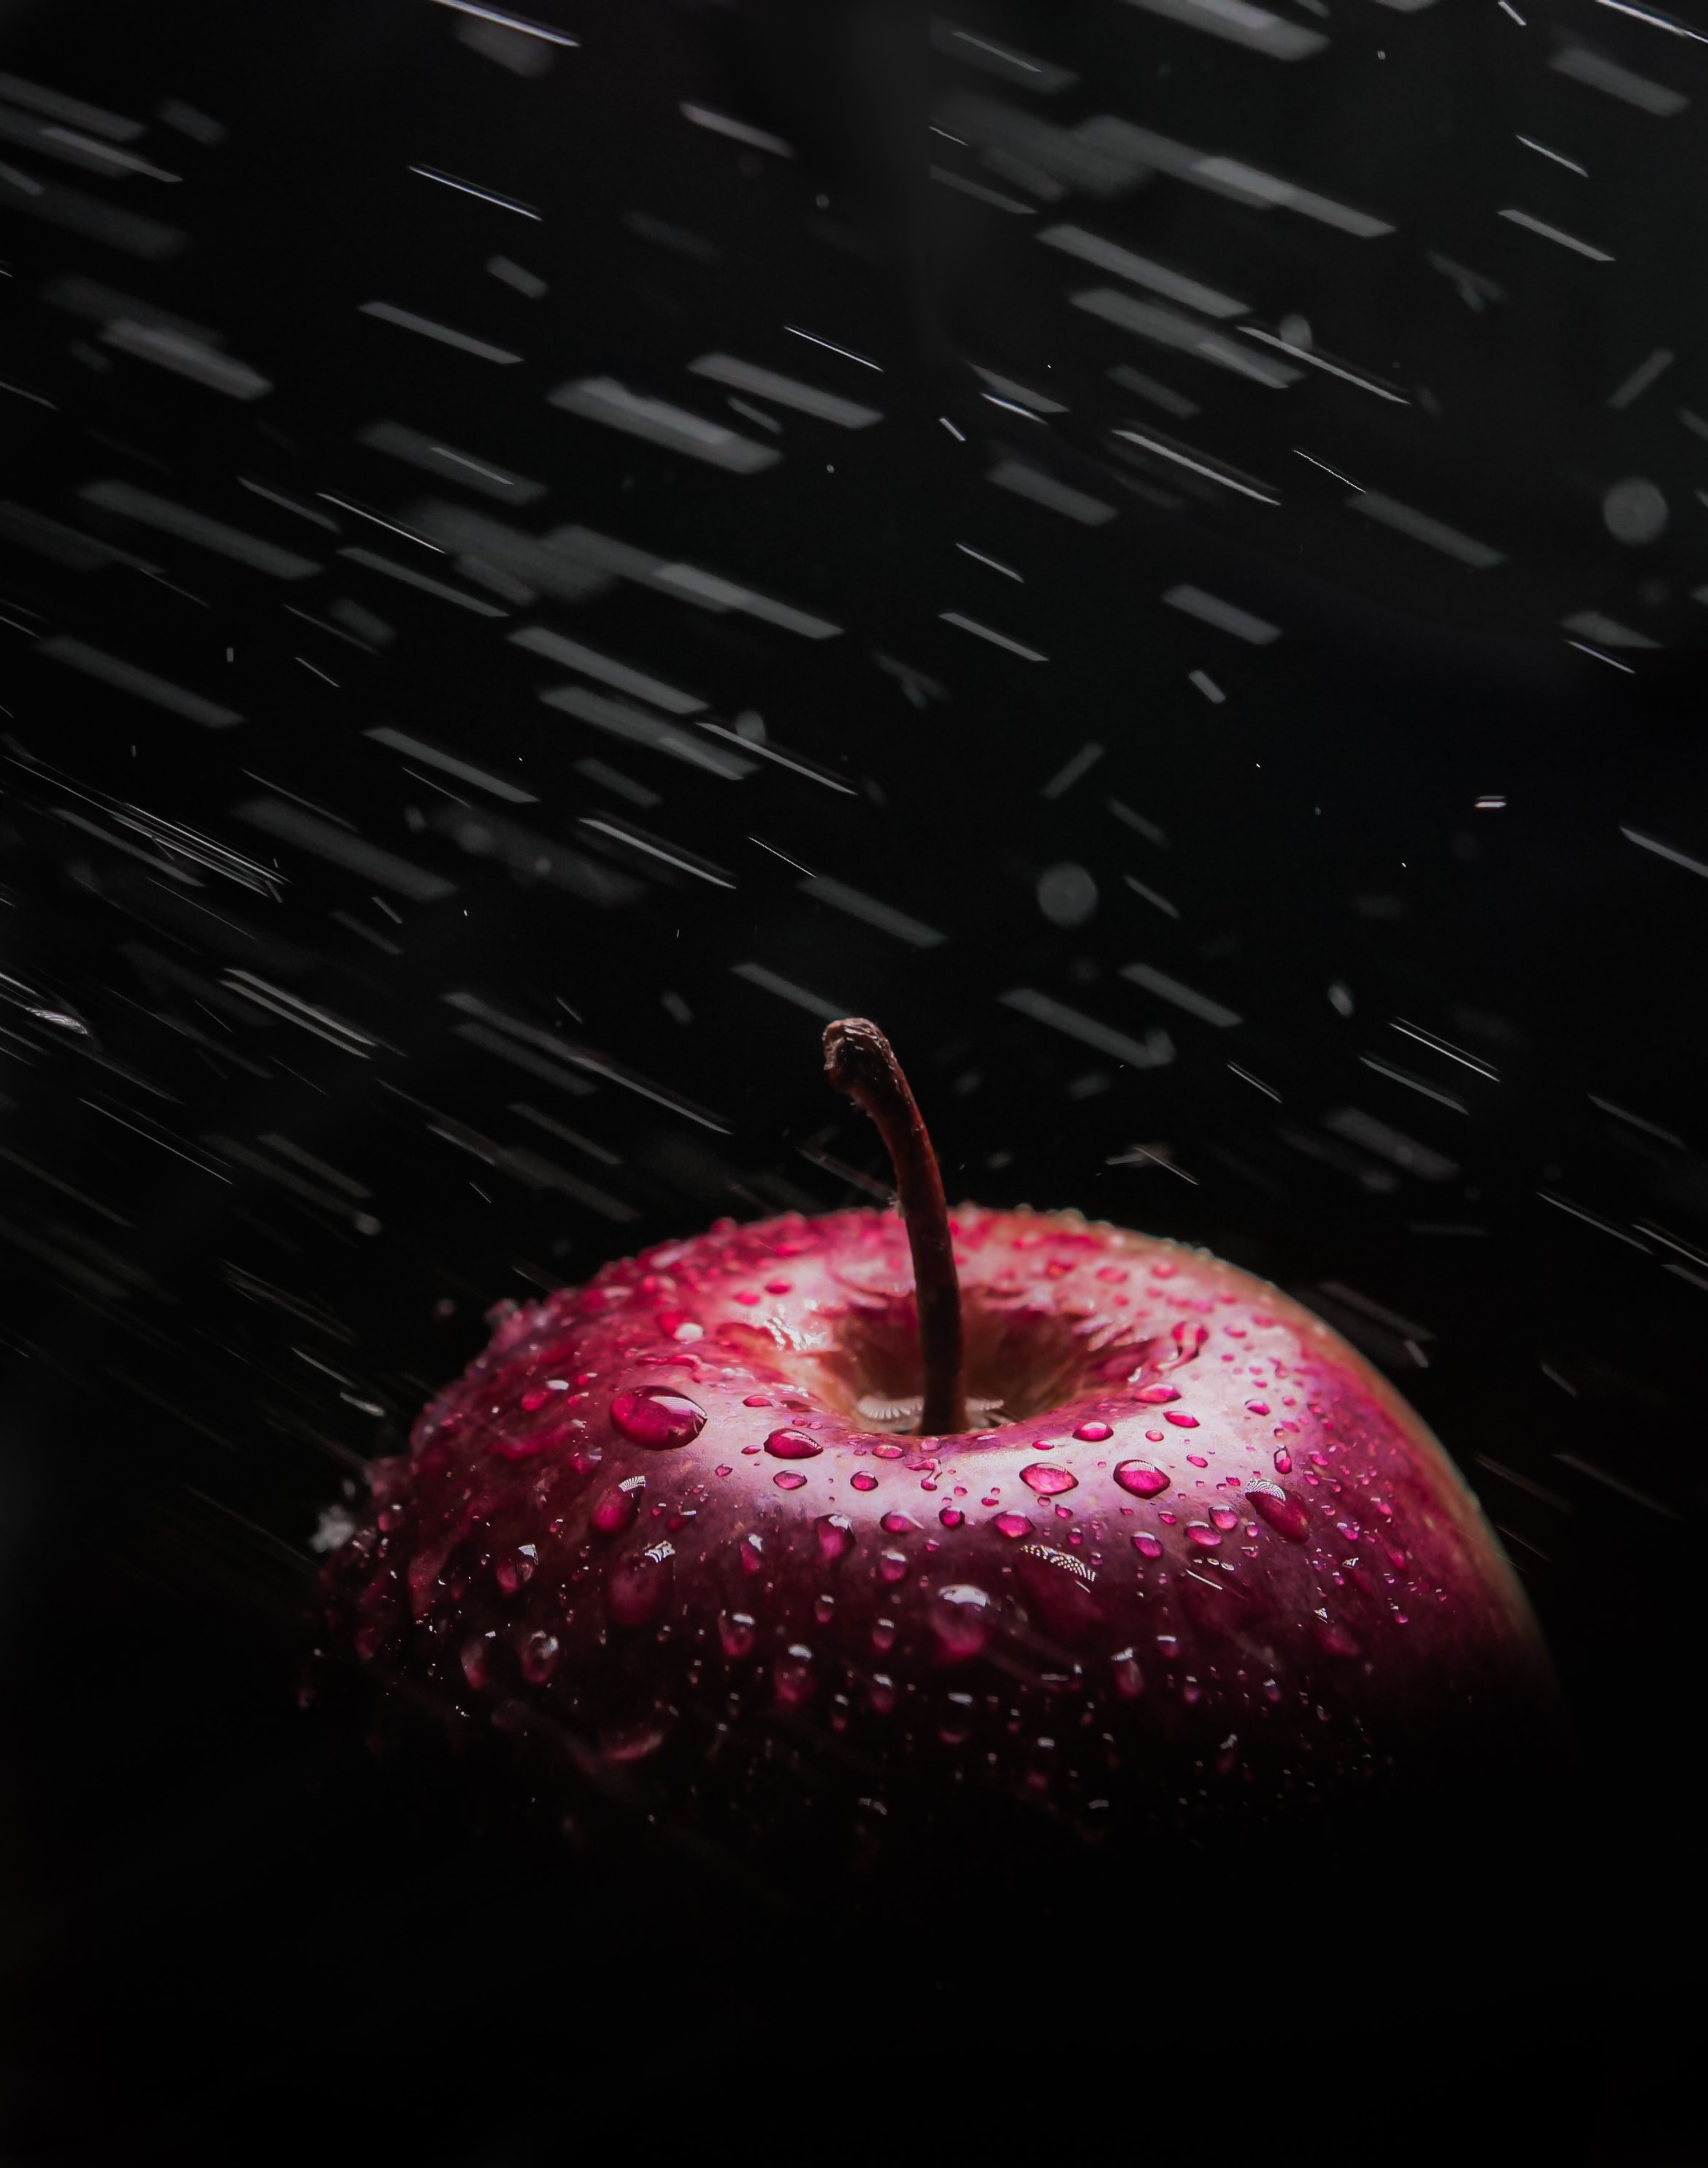 146809 Screensavers and Wallpapers Apple for phone. Download food, apple, drops, red, wet, spray pictures for free